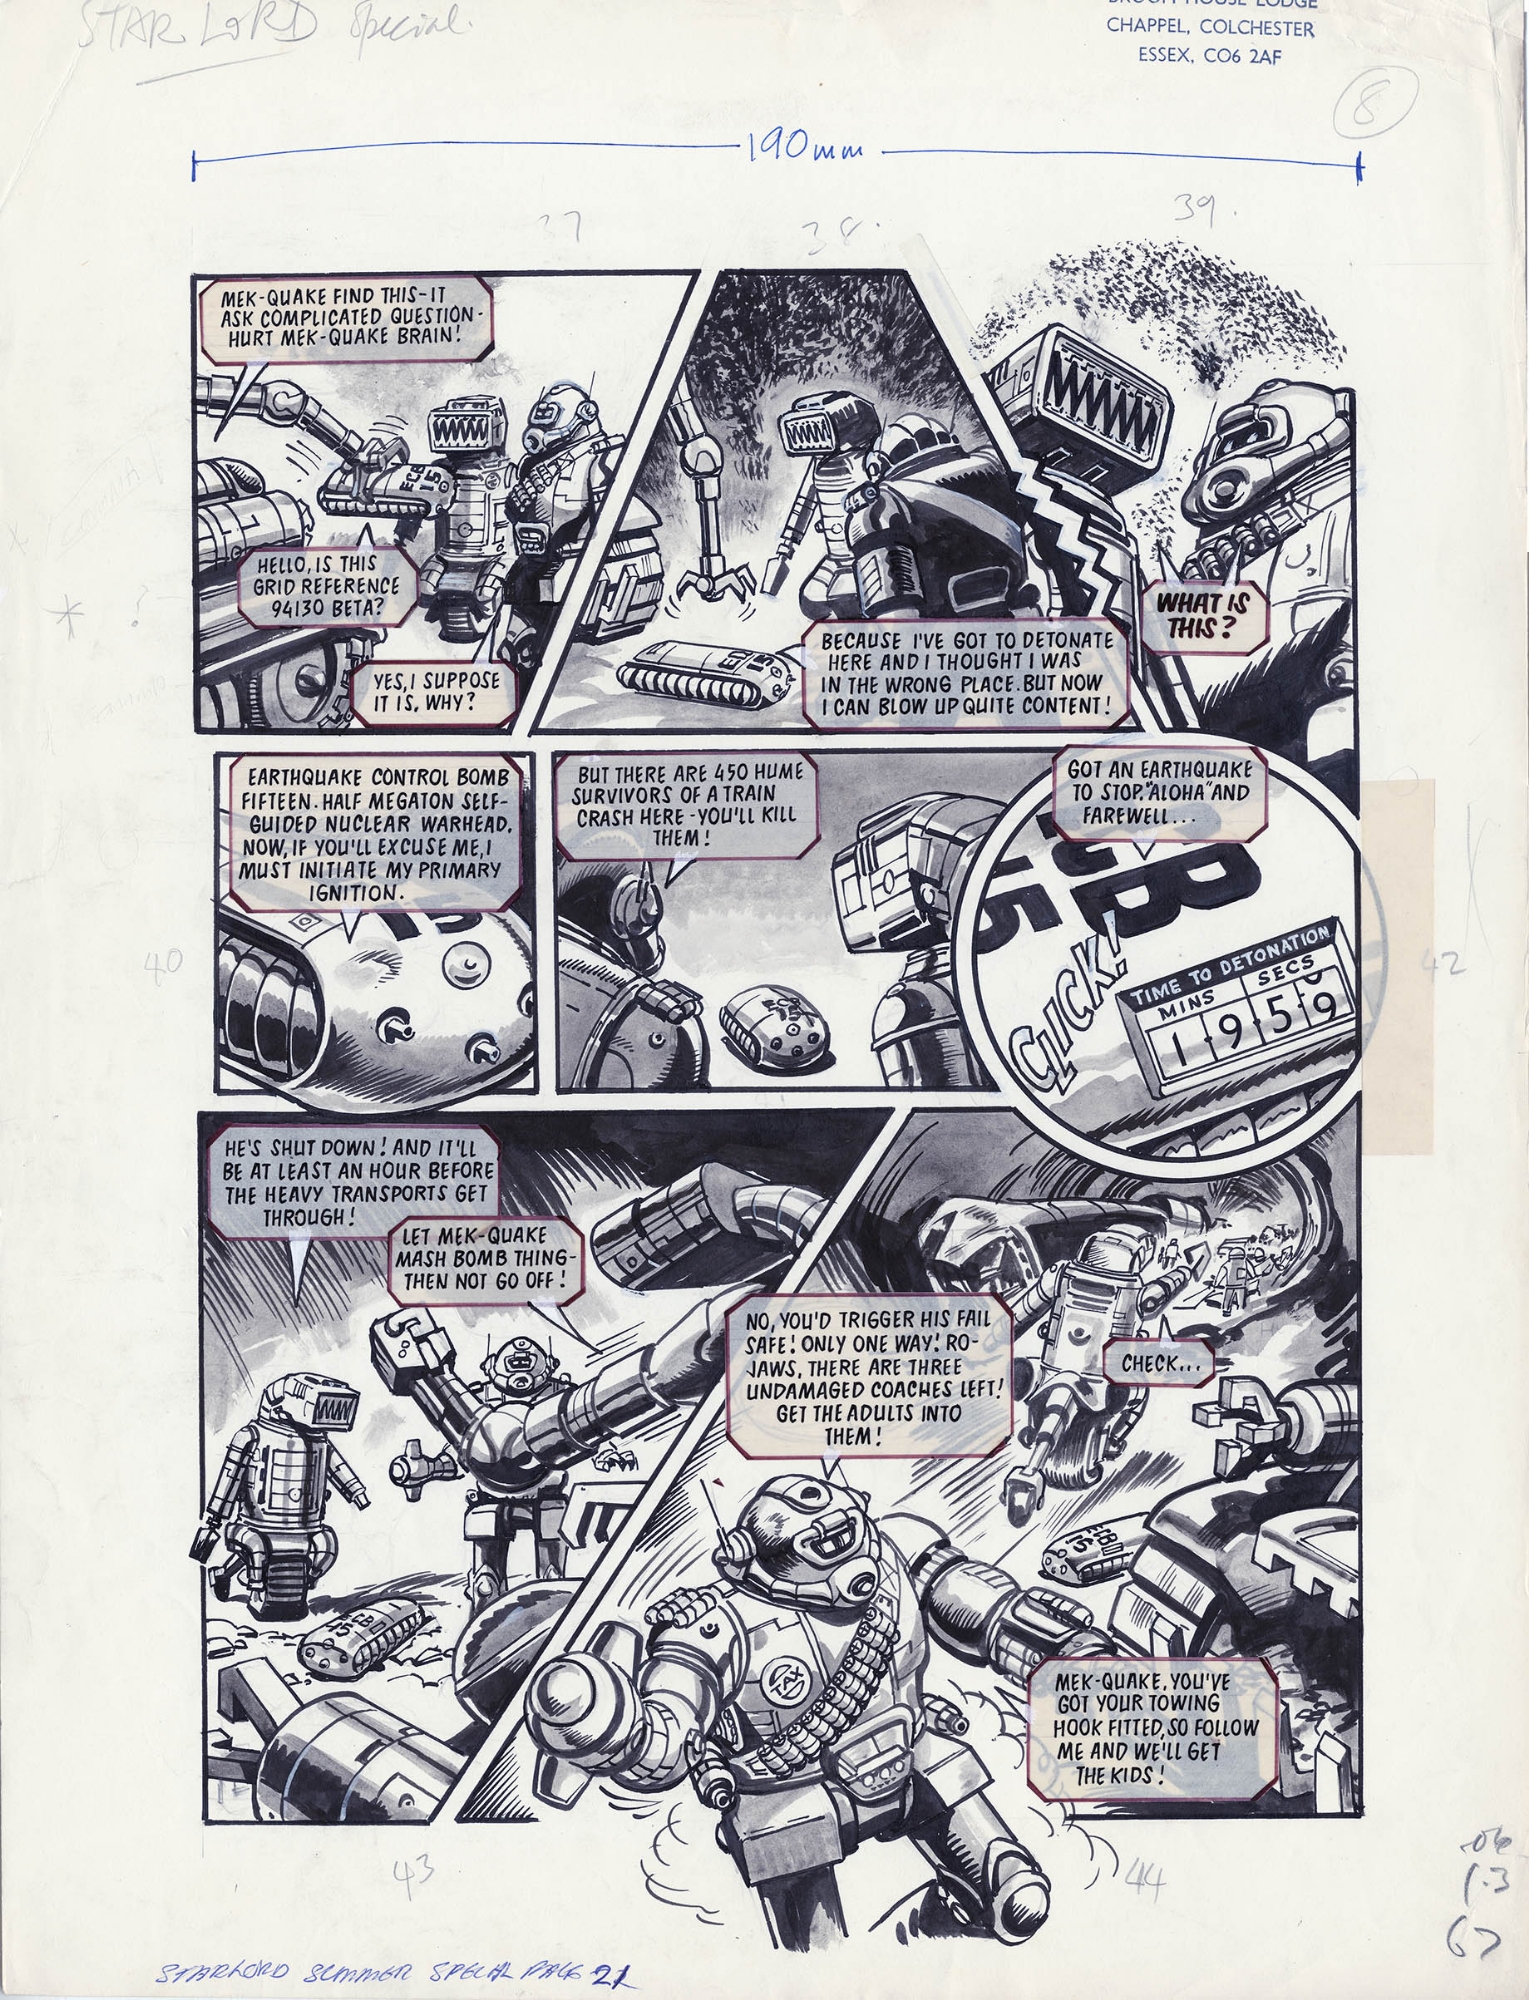 Robusters Starlord Summer Special 1978 Page 8 Geoff Campion